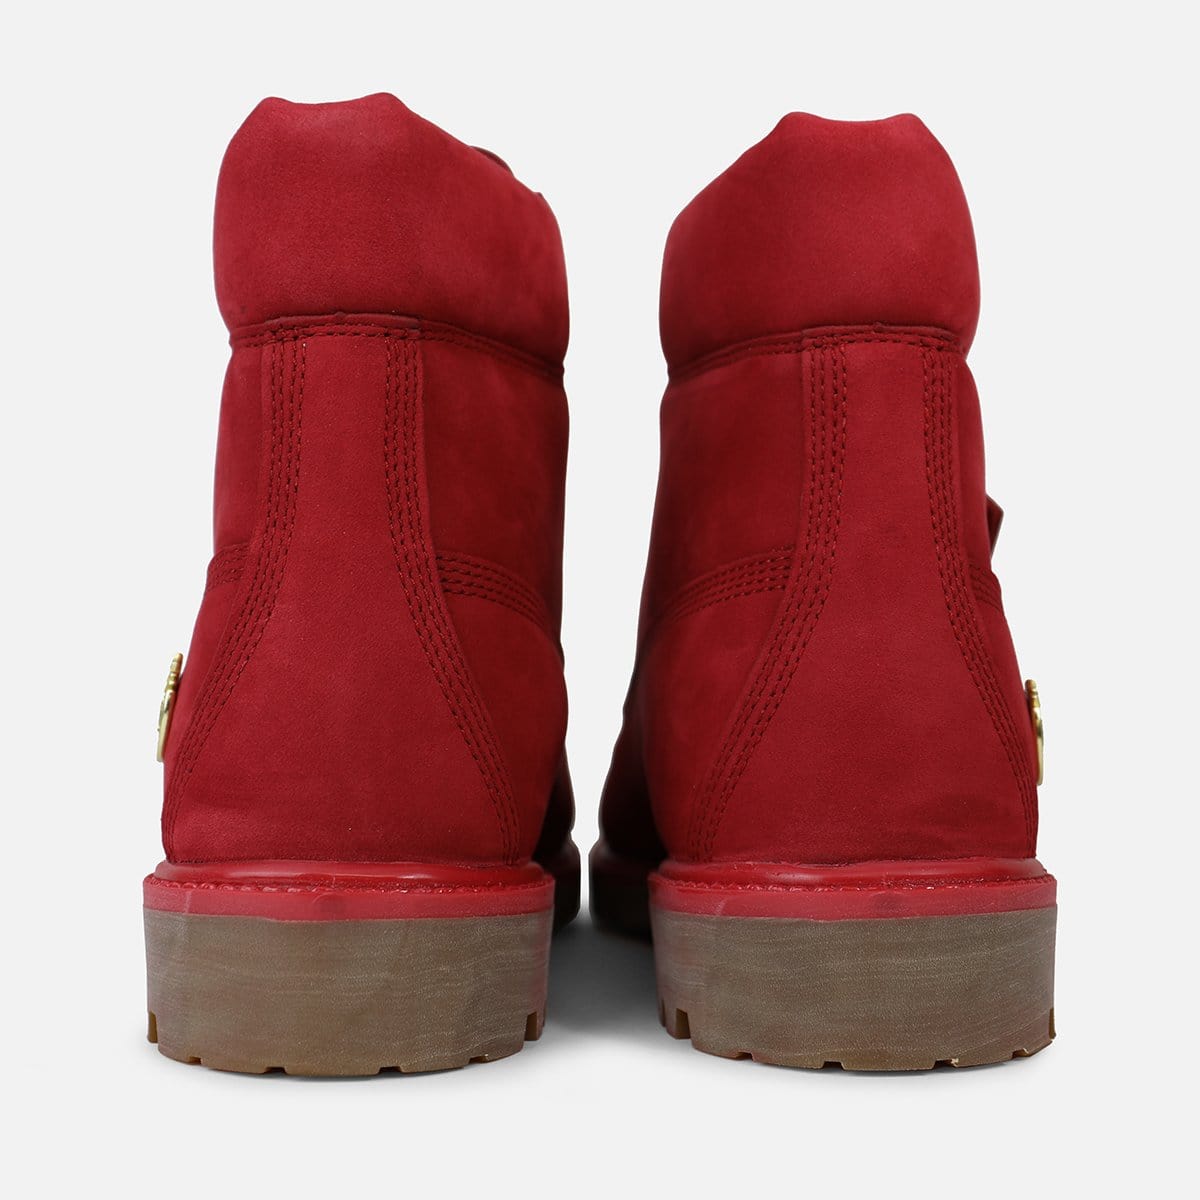 RUVilla.com is where to buy the Timberland 6" Premium Boot 'Fire' (Red/Red)!